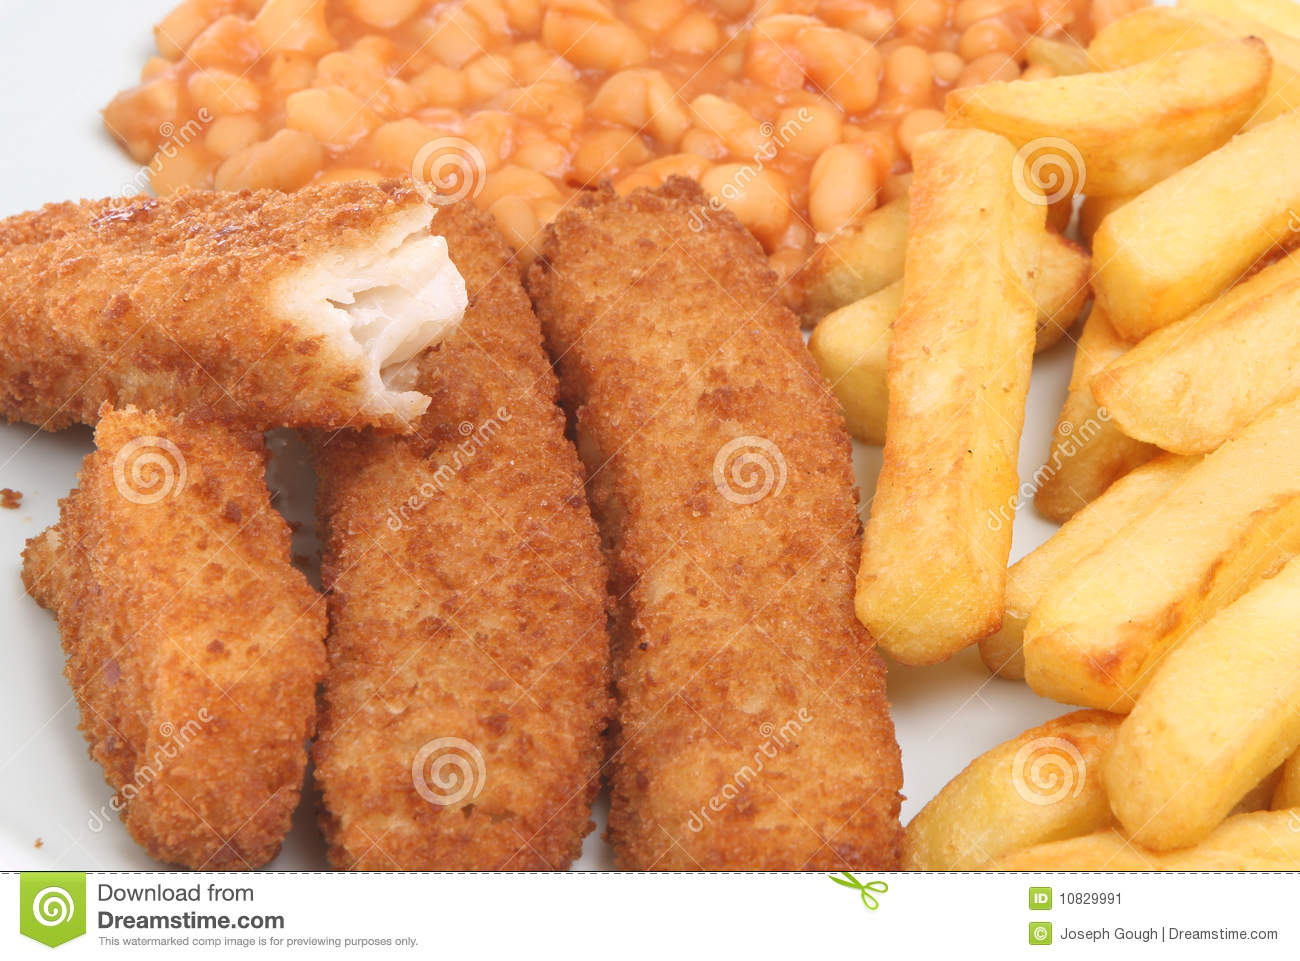 Fish Fingers   Chips Stock Image   Image  10829991